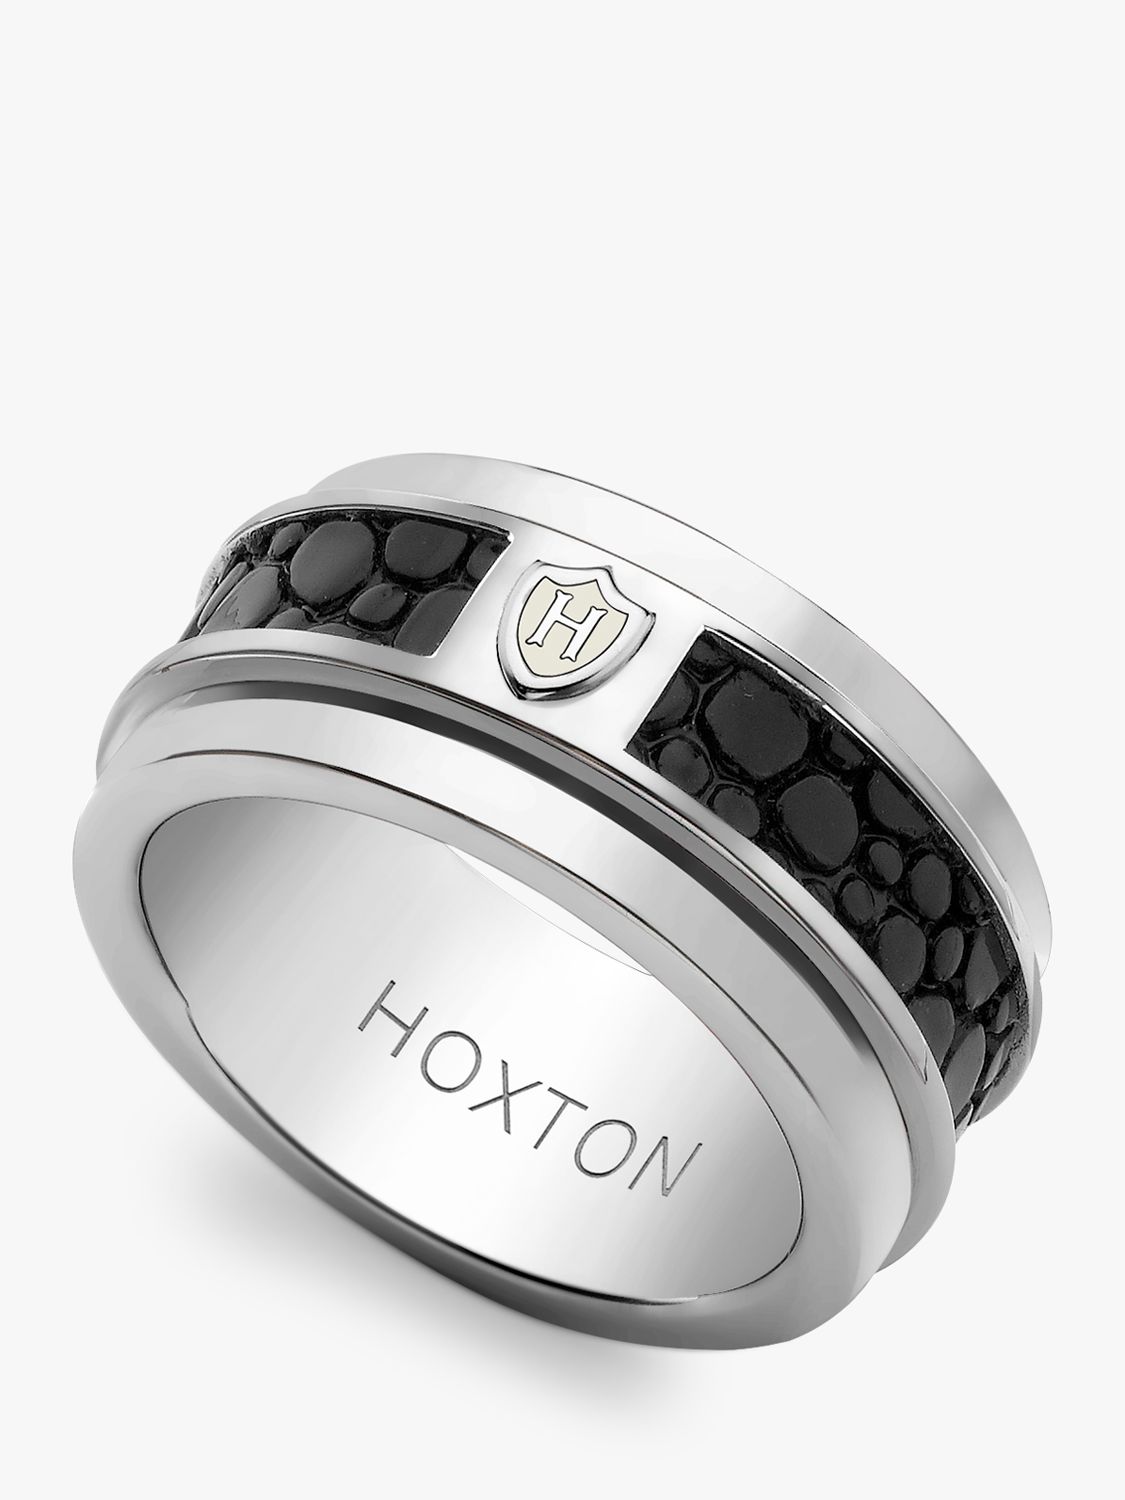 Hoxton London Men's Sterling Silver Black Printed Leather Spinning Ring, Silver/Black